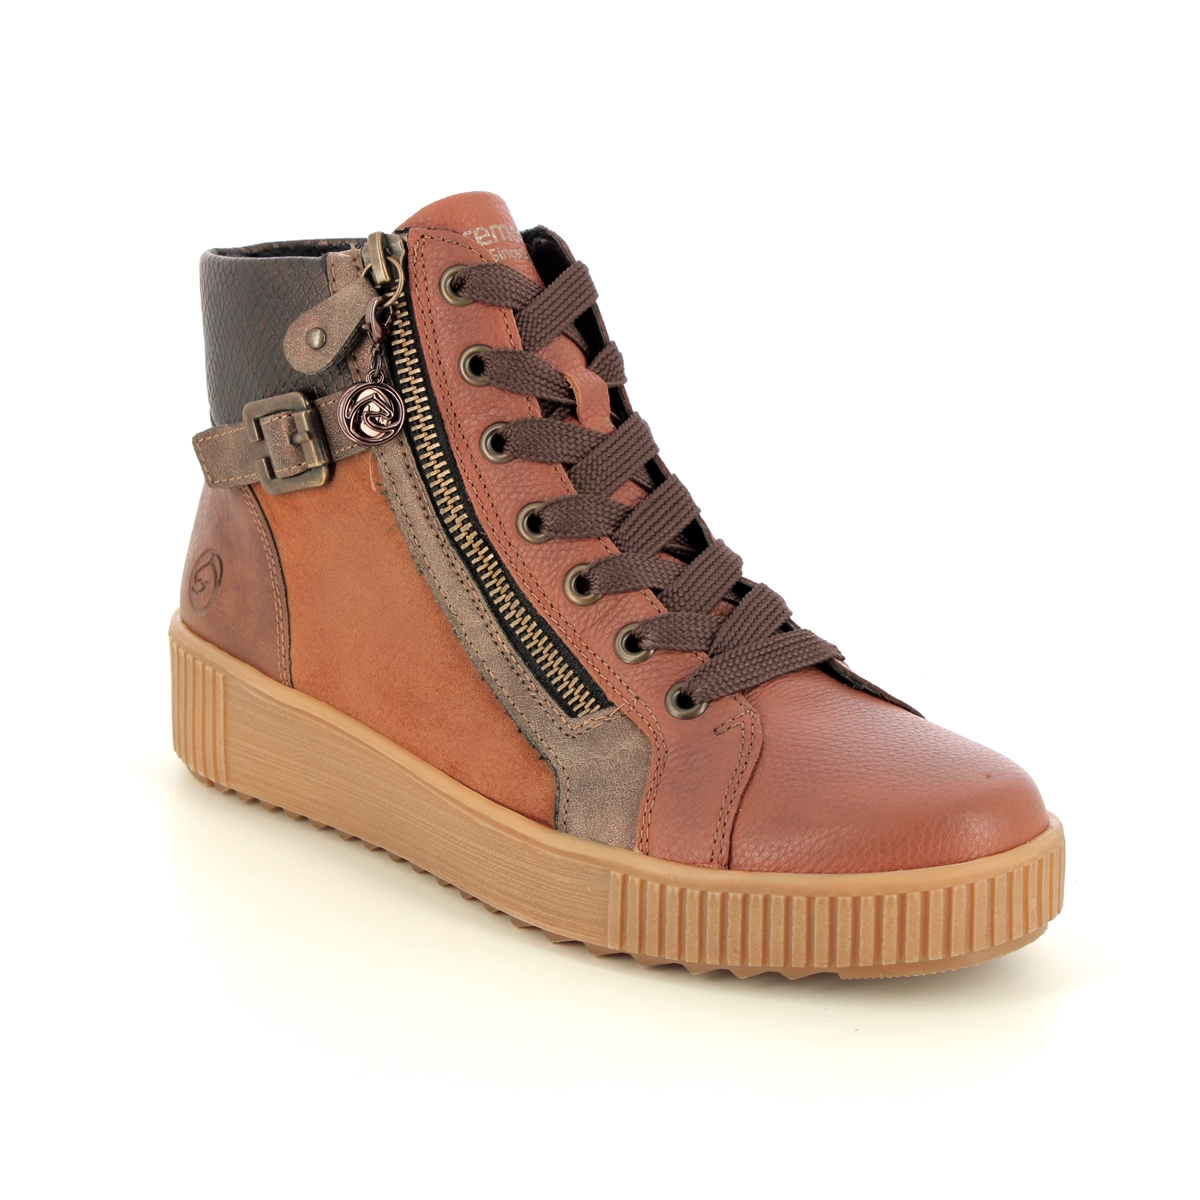 Remonte Durlozip Elle Tan Leather Womens Hi Tops R7997-24 In Size 39 In Plain Tan Leather